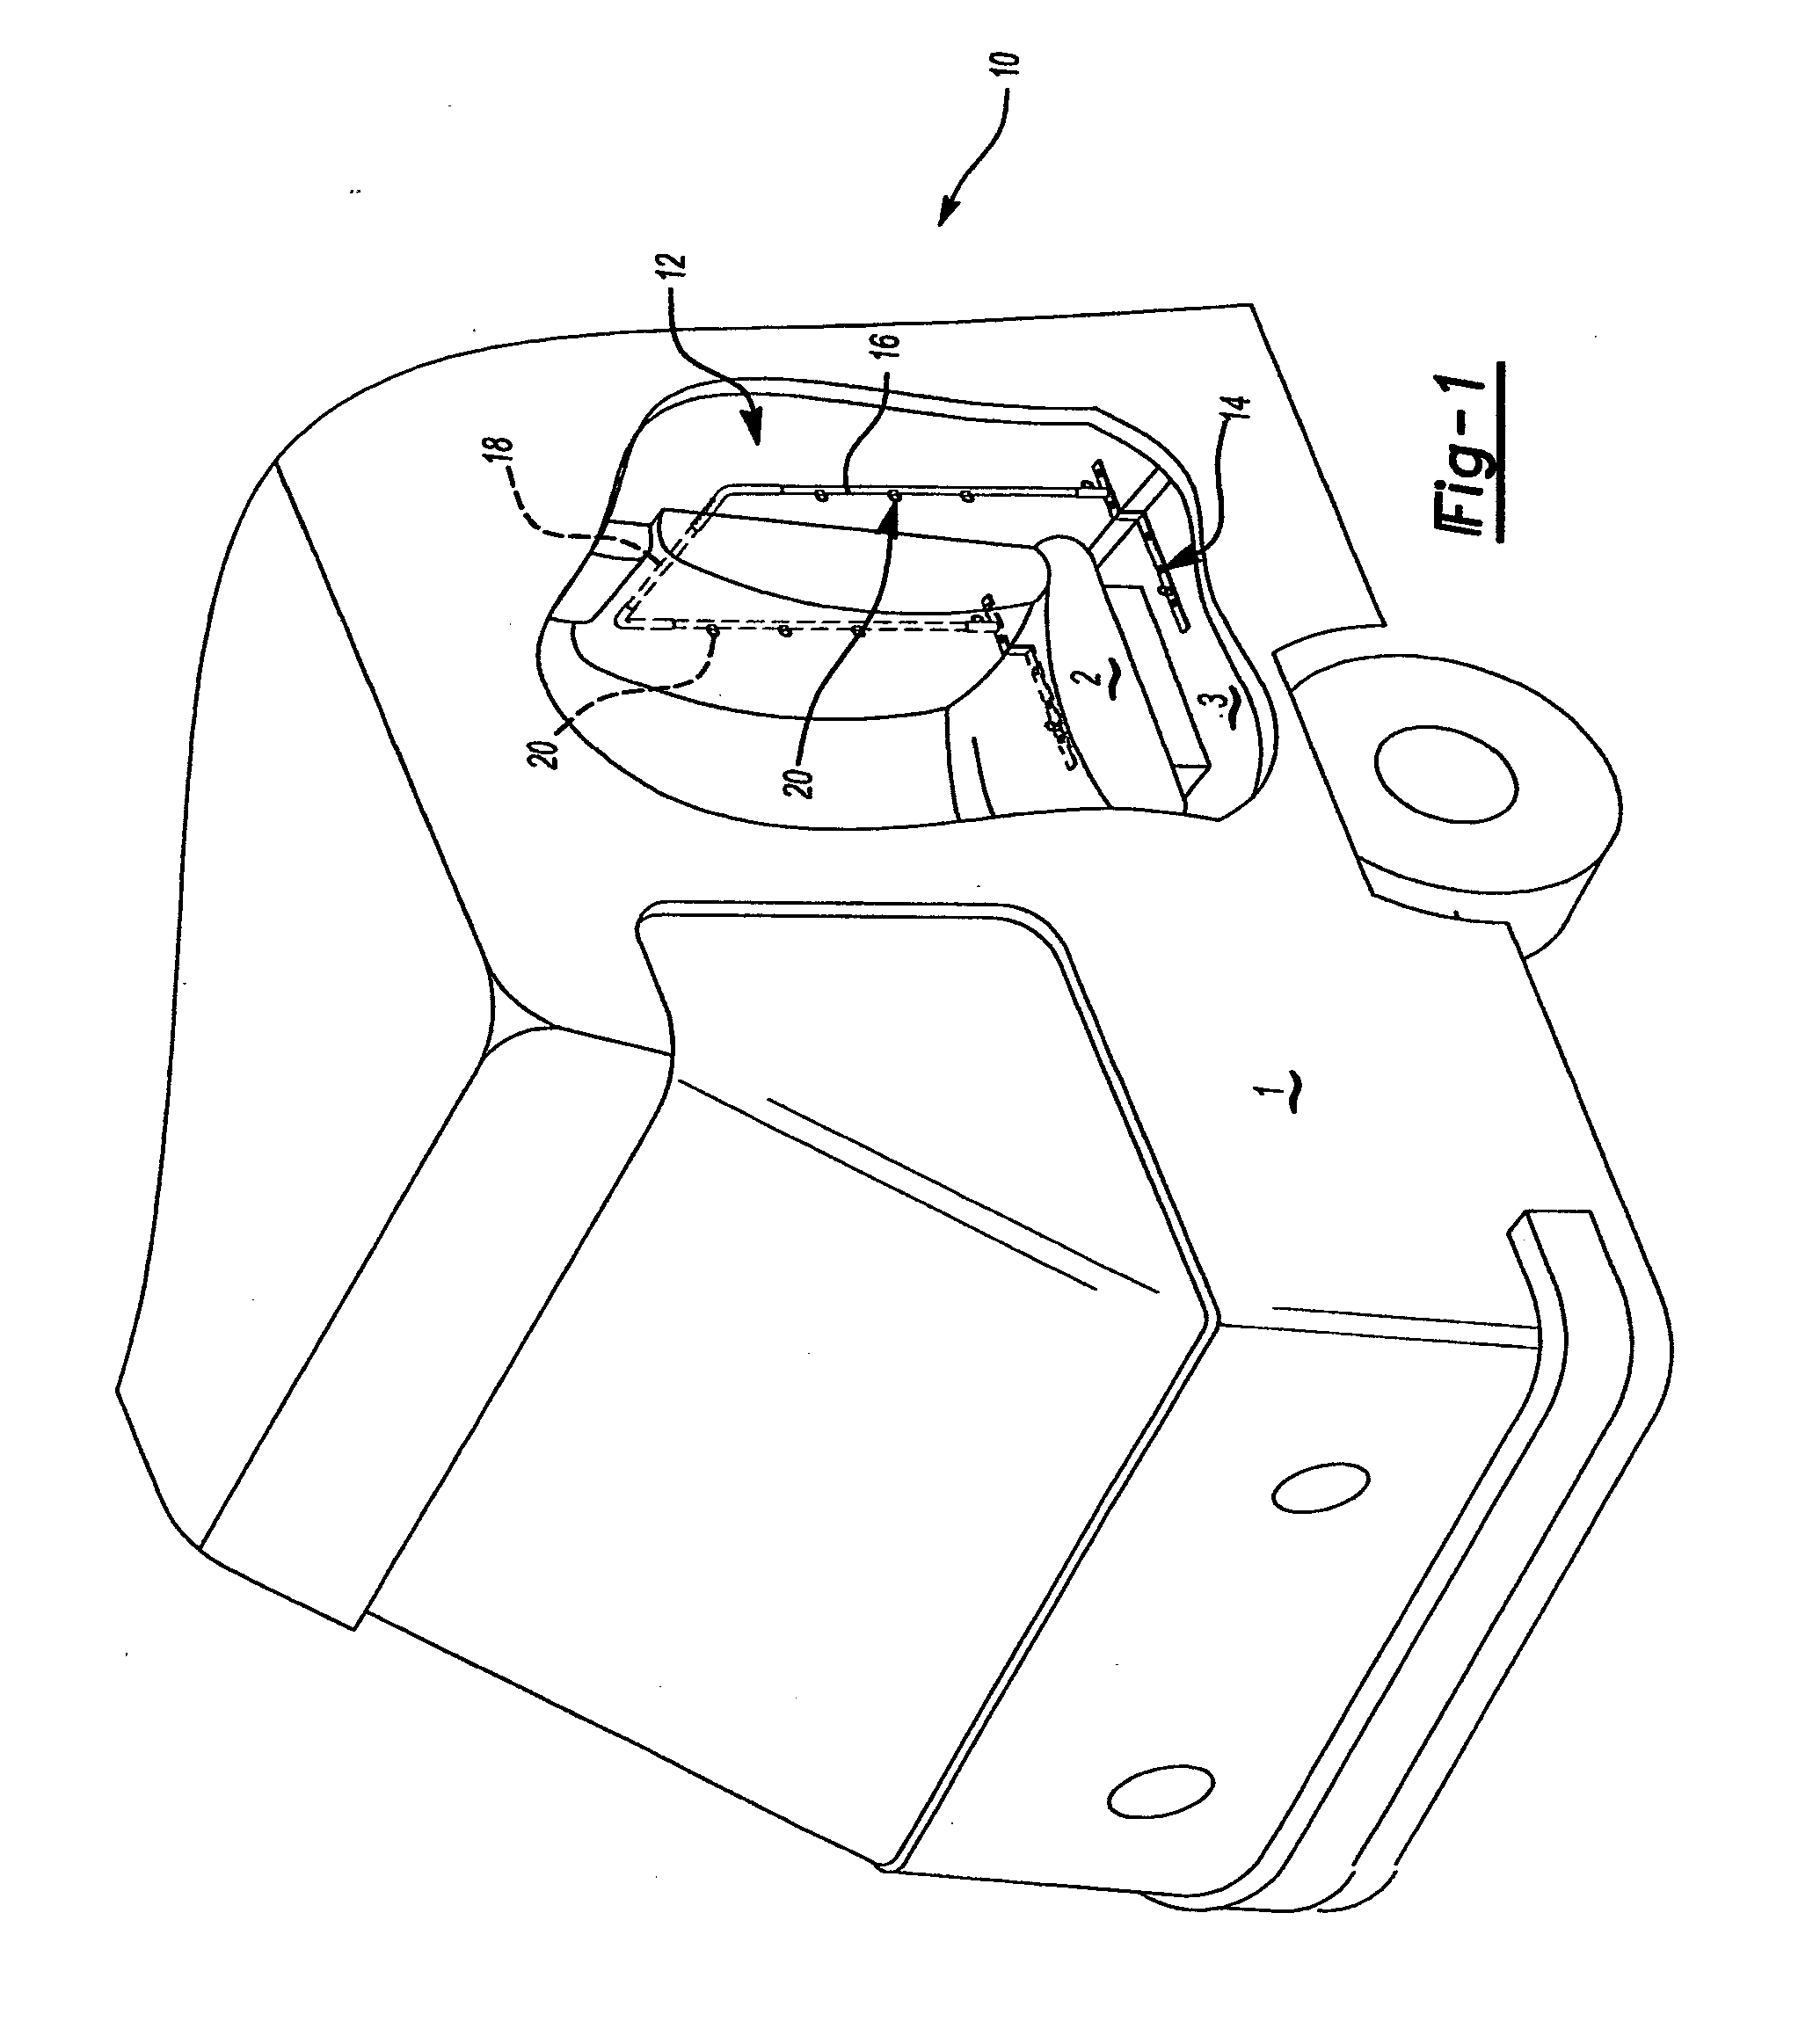 Exercise system for use within a vehicle